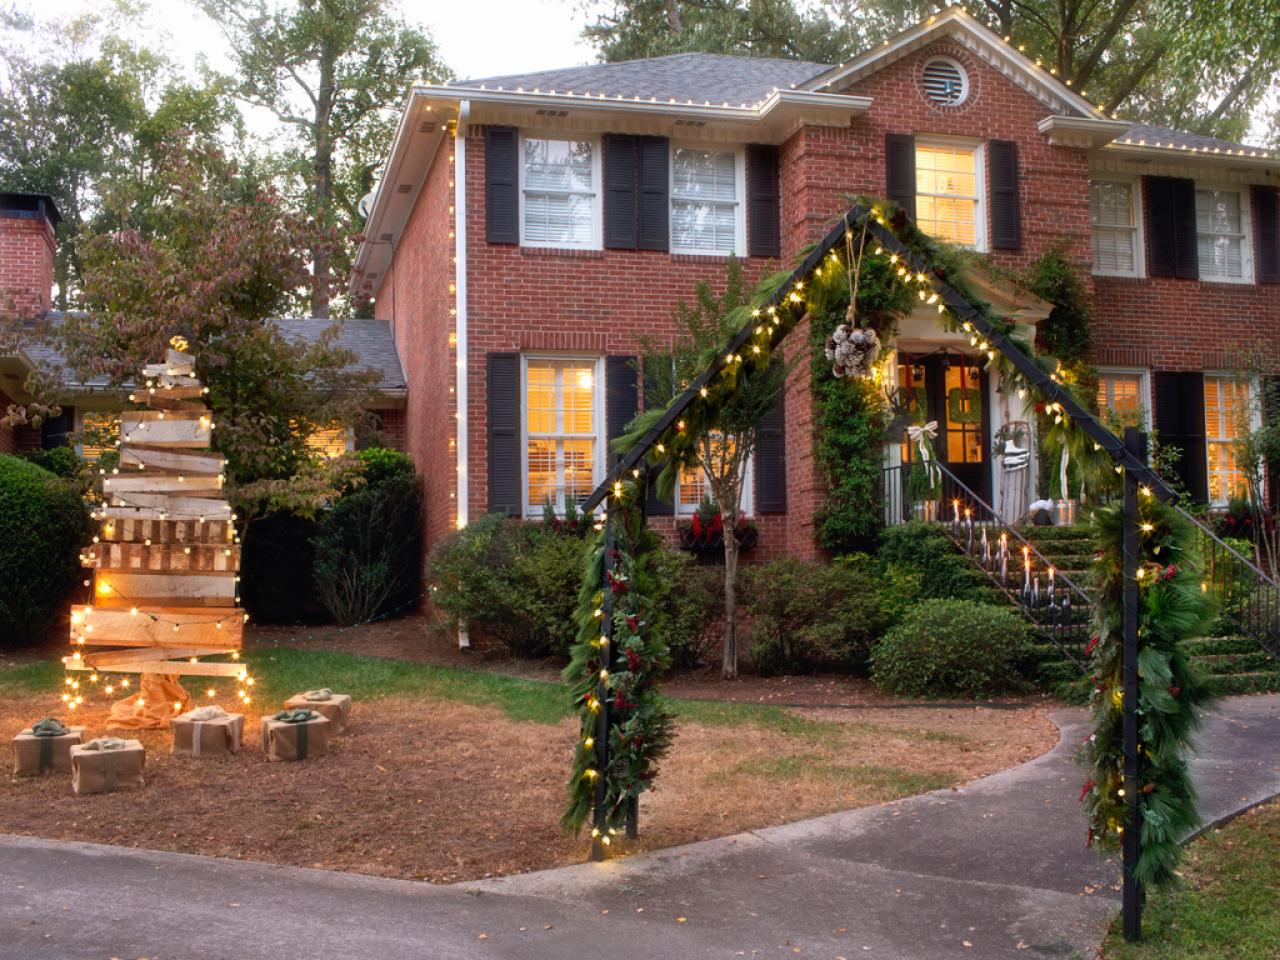 Stunning Ideas For Christmas Lights Decorations In The Garden